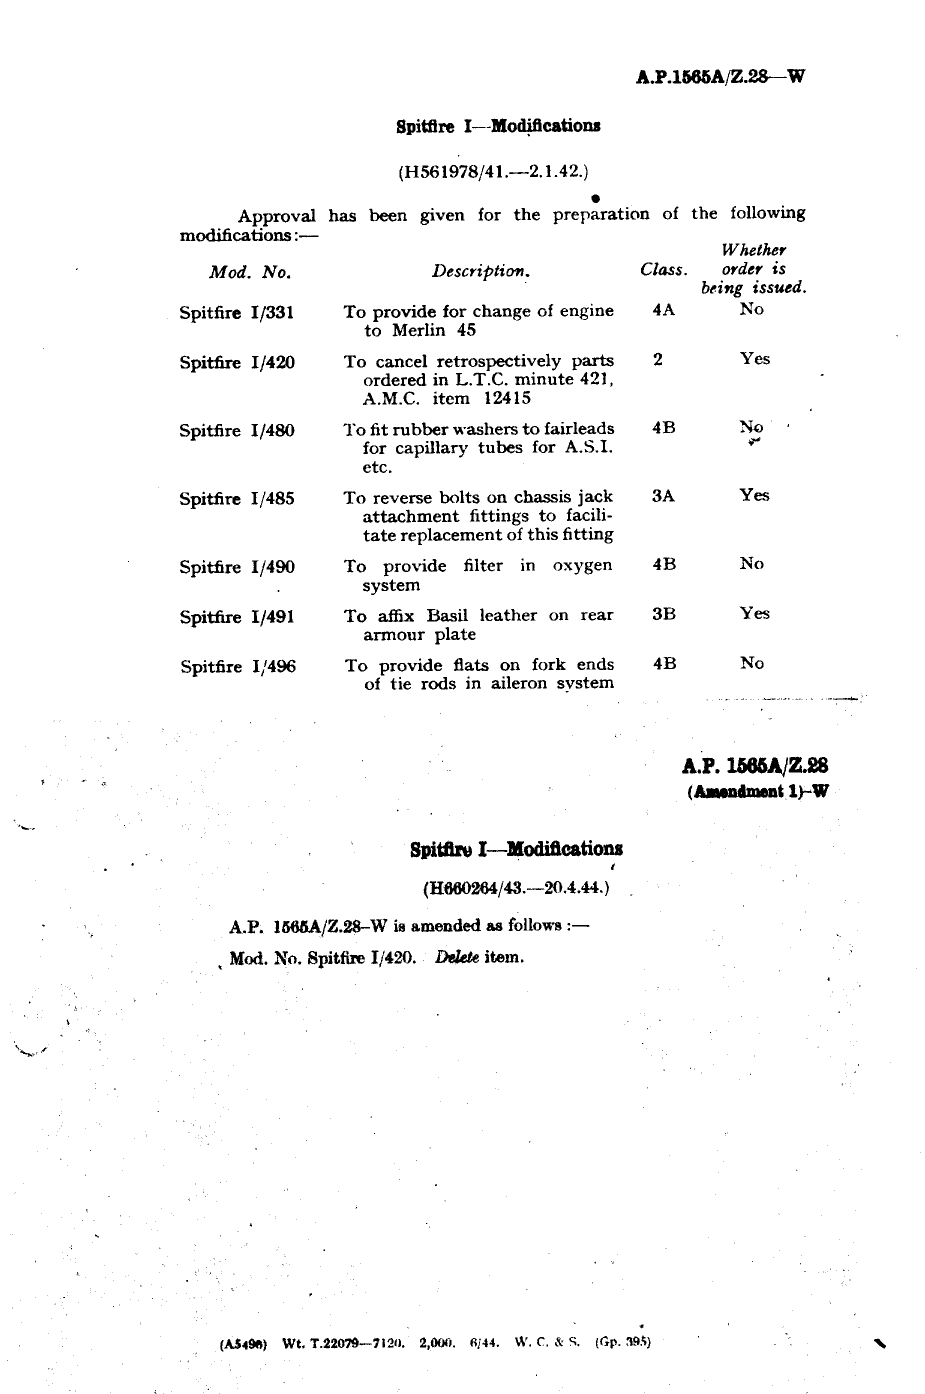 Sample page 1 from AirCorps Library document: Spitfire I Modifications 331, 420, 480, 485, 490, 491 and 496